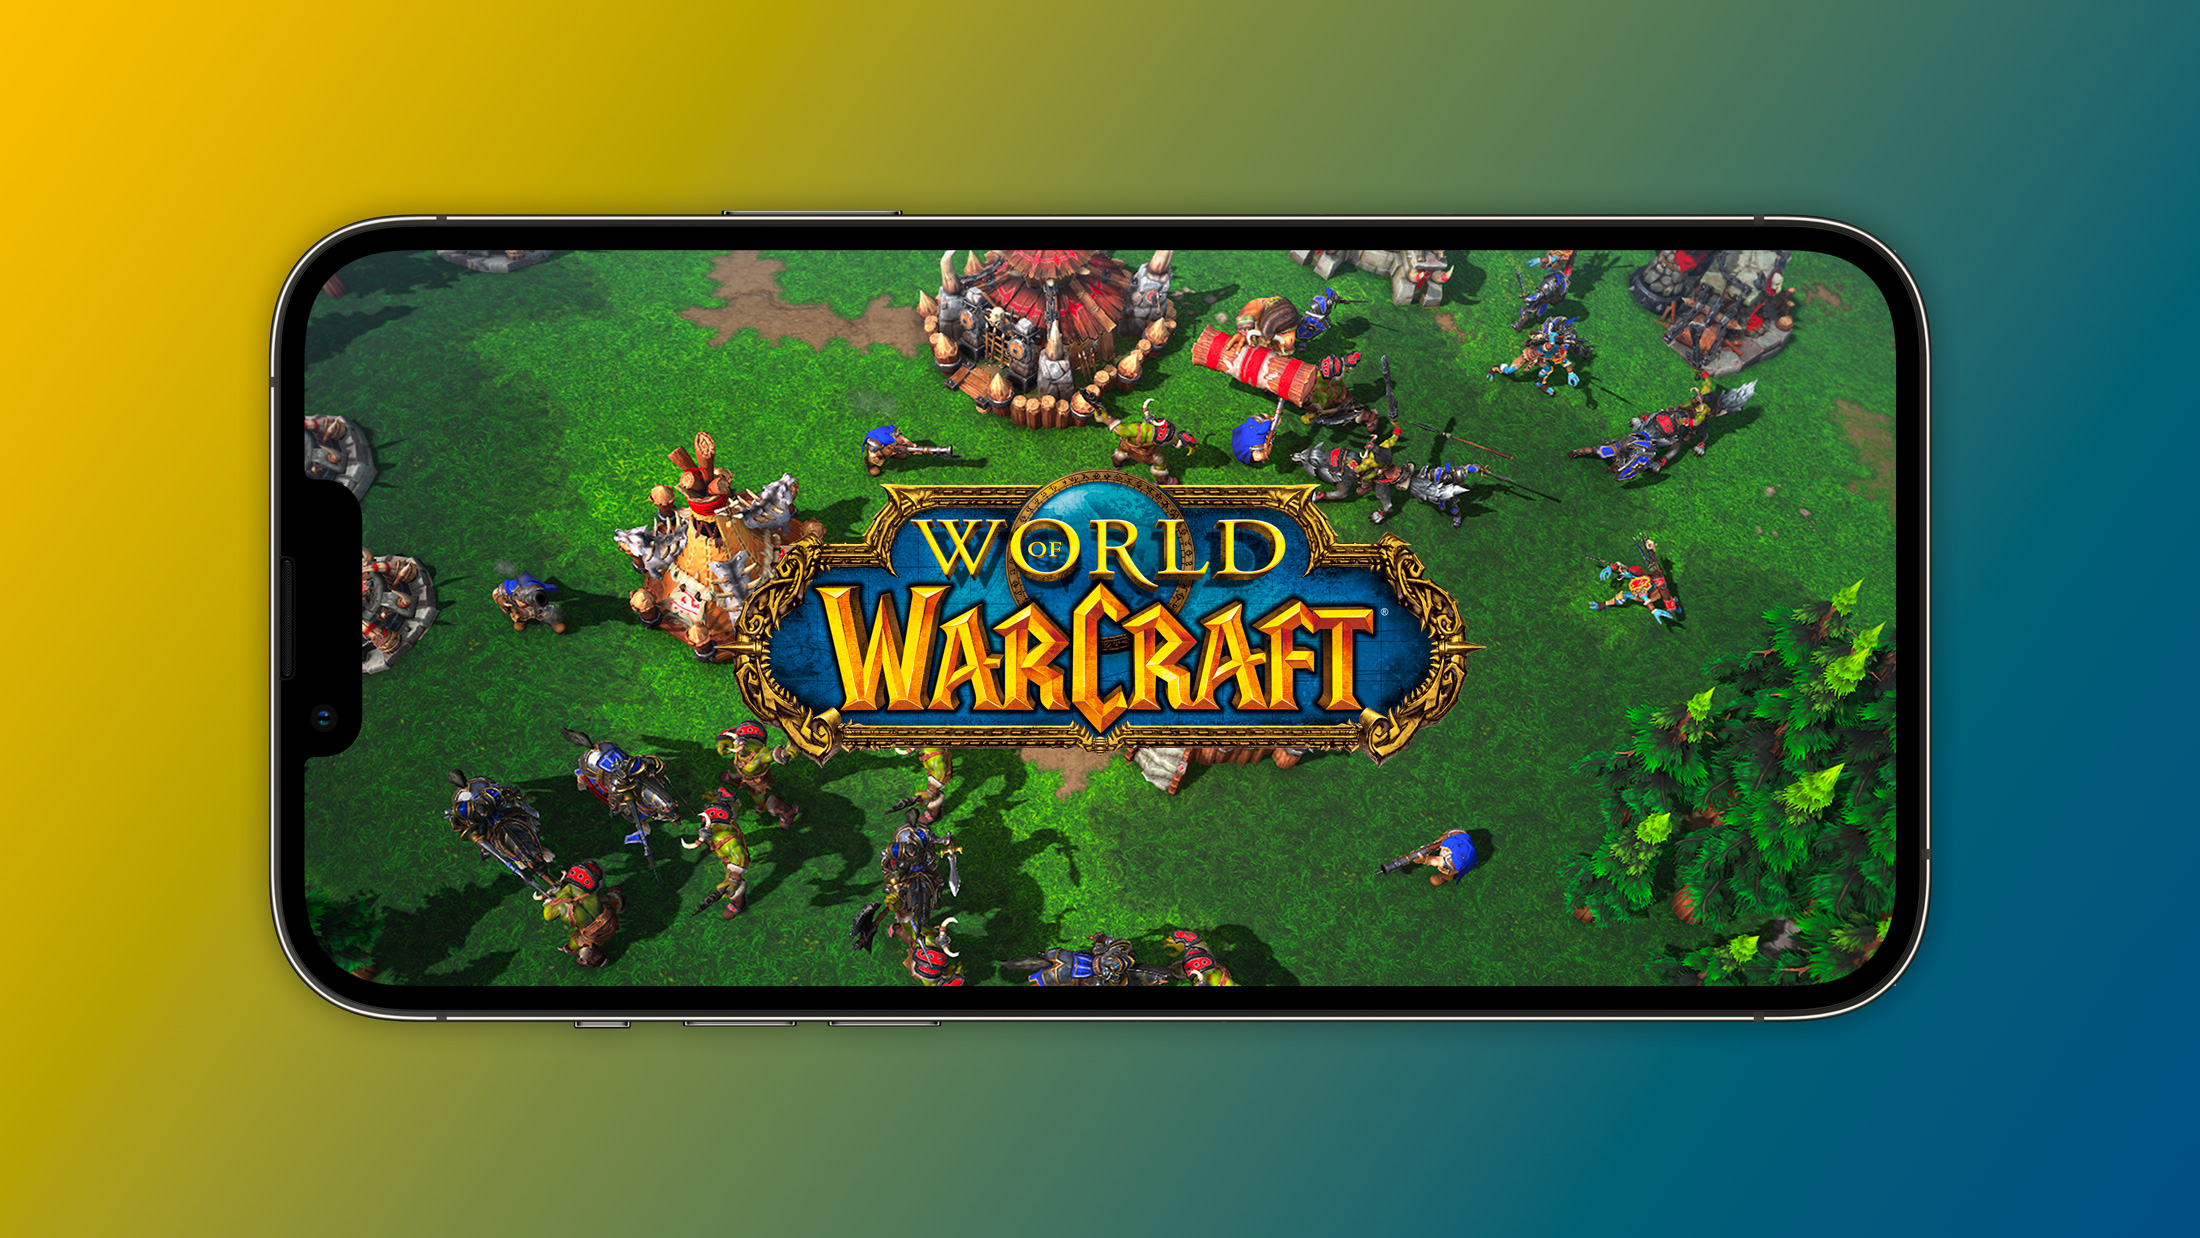 Blizzard confirms Warcraft coming to mobile devices in 2022 - 9to5Mac